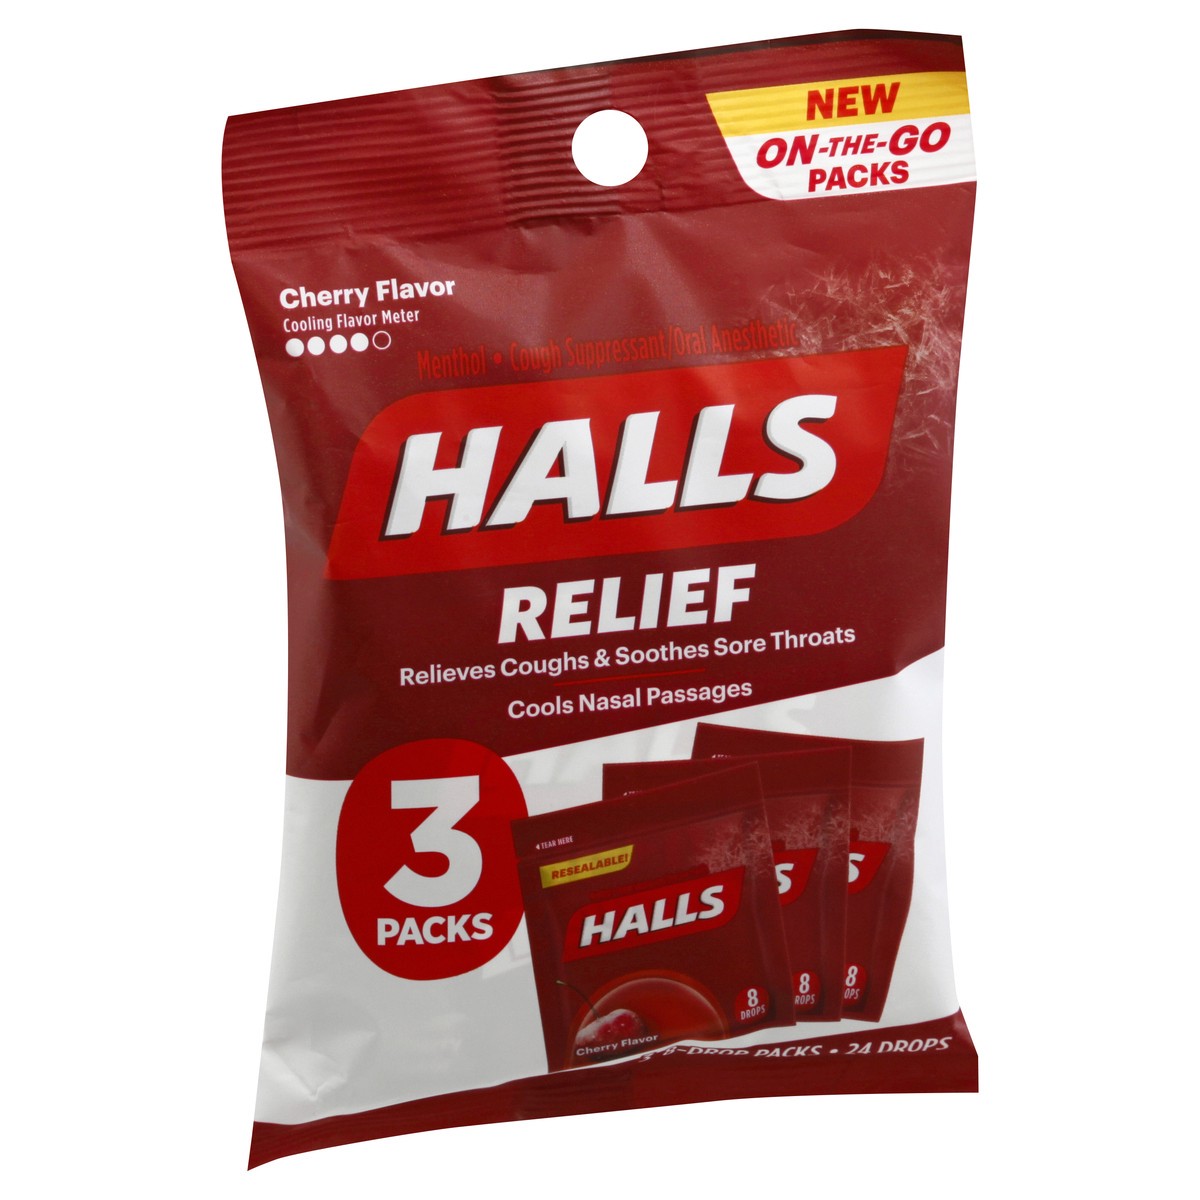 slide 4 of 11, HALLS Relief Cherry Cough Drops, 3 On-the-Go Packs of 8 Drops (24 Drops Total)
, 2.62 oz